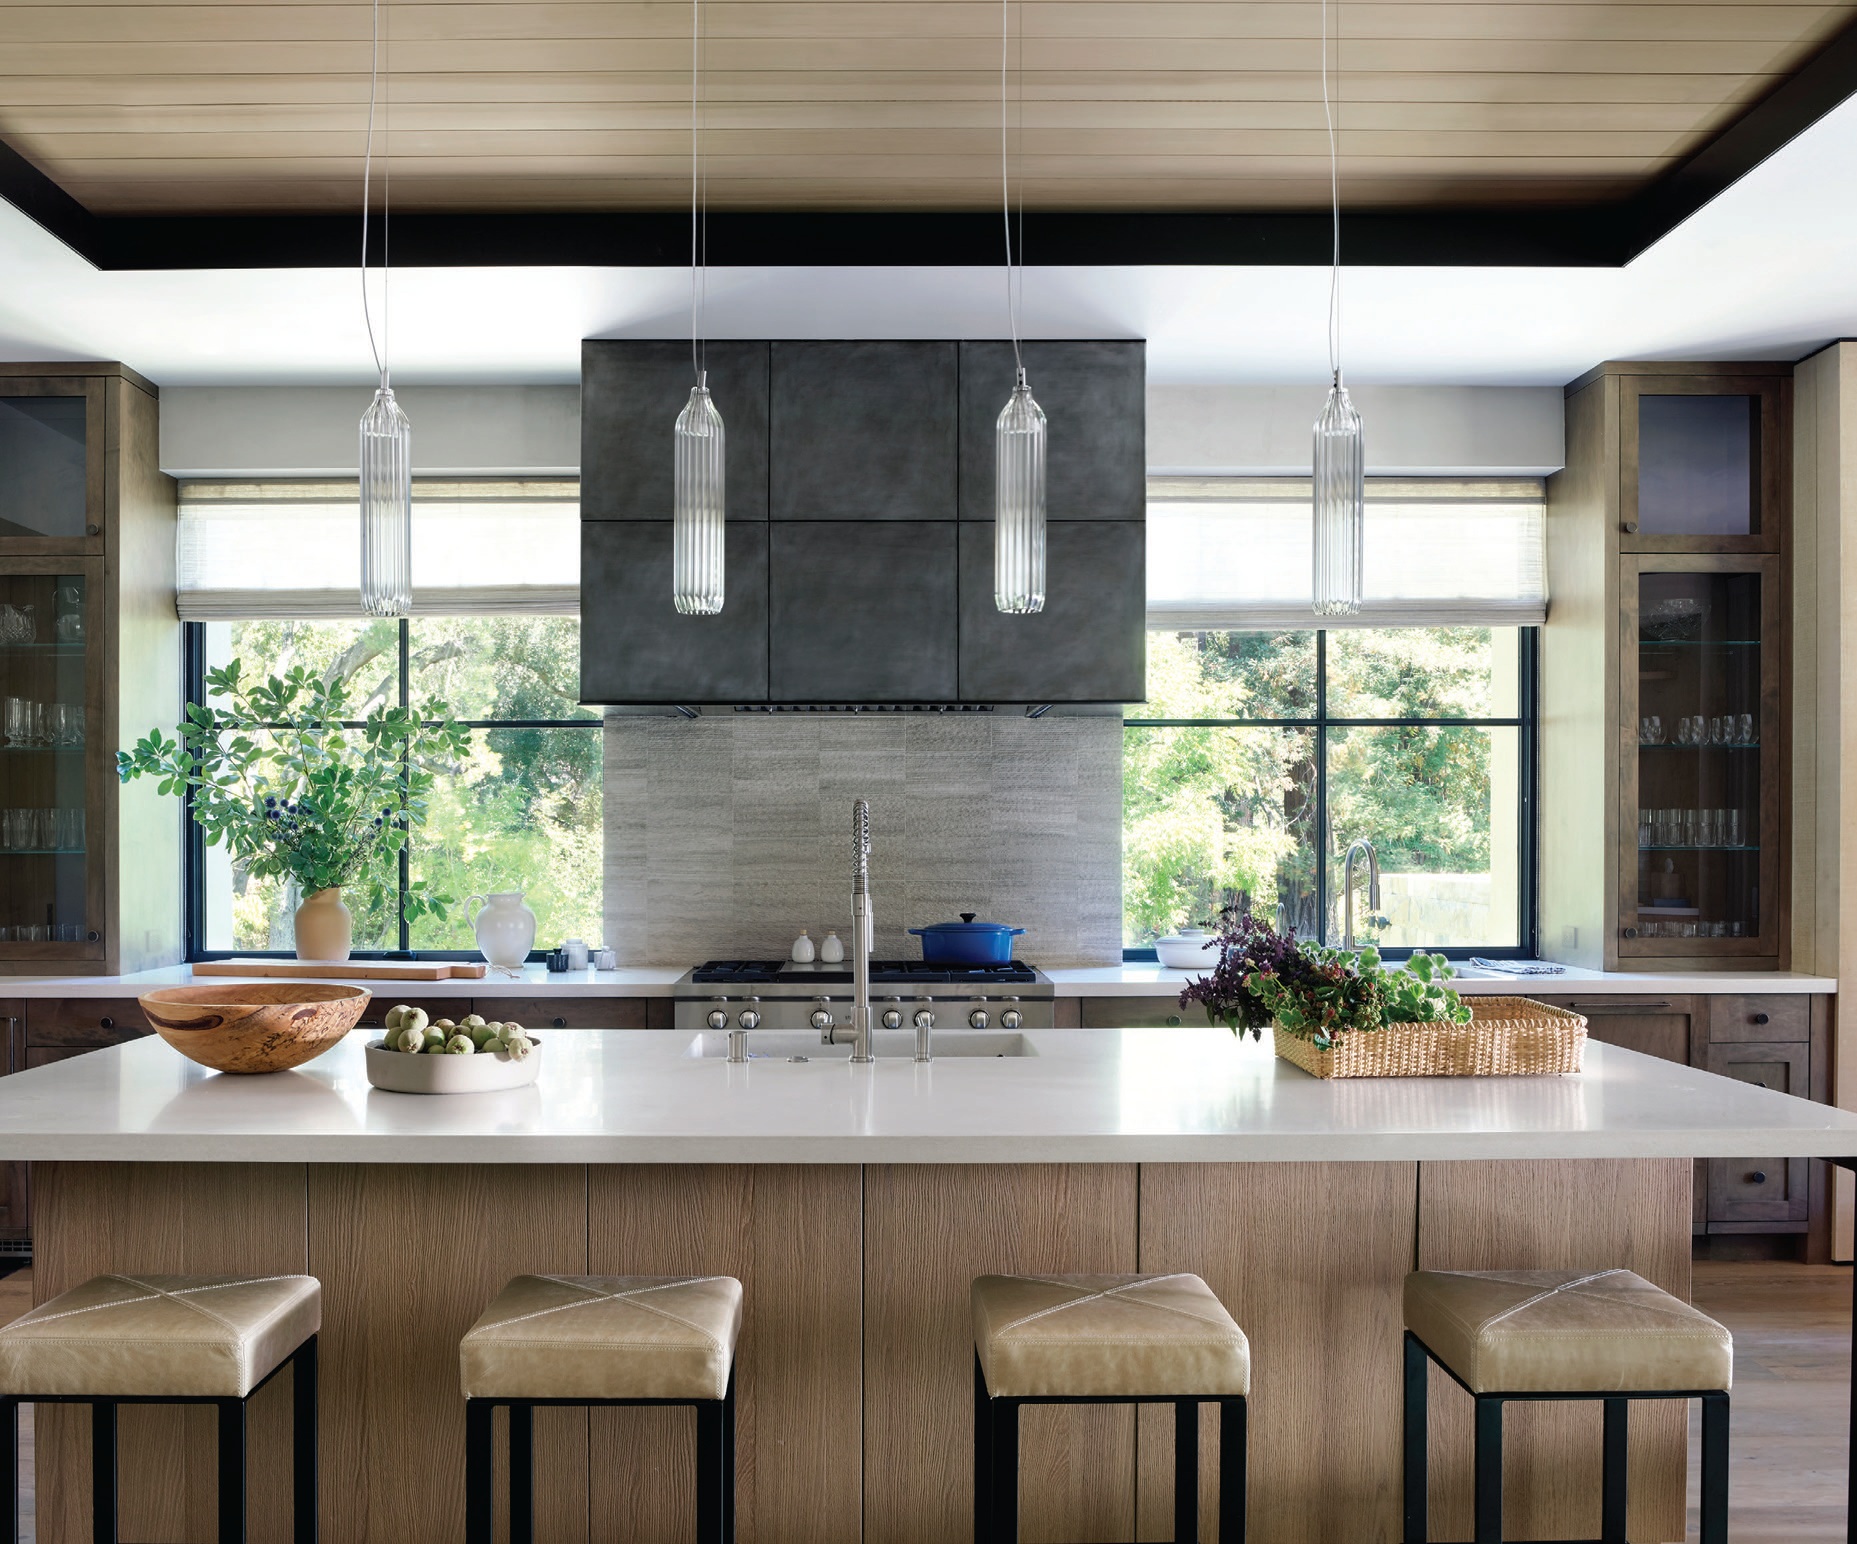 The kitchen features rift-sawn cabinetry with customized oxidized walnut cabinets. PHOTOGRAPHED BY PAUL DYER